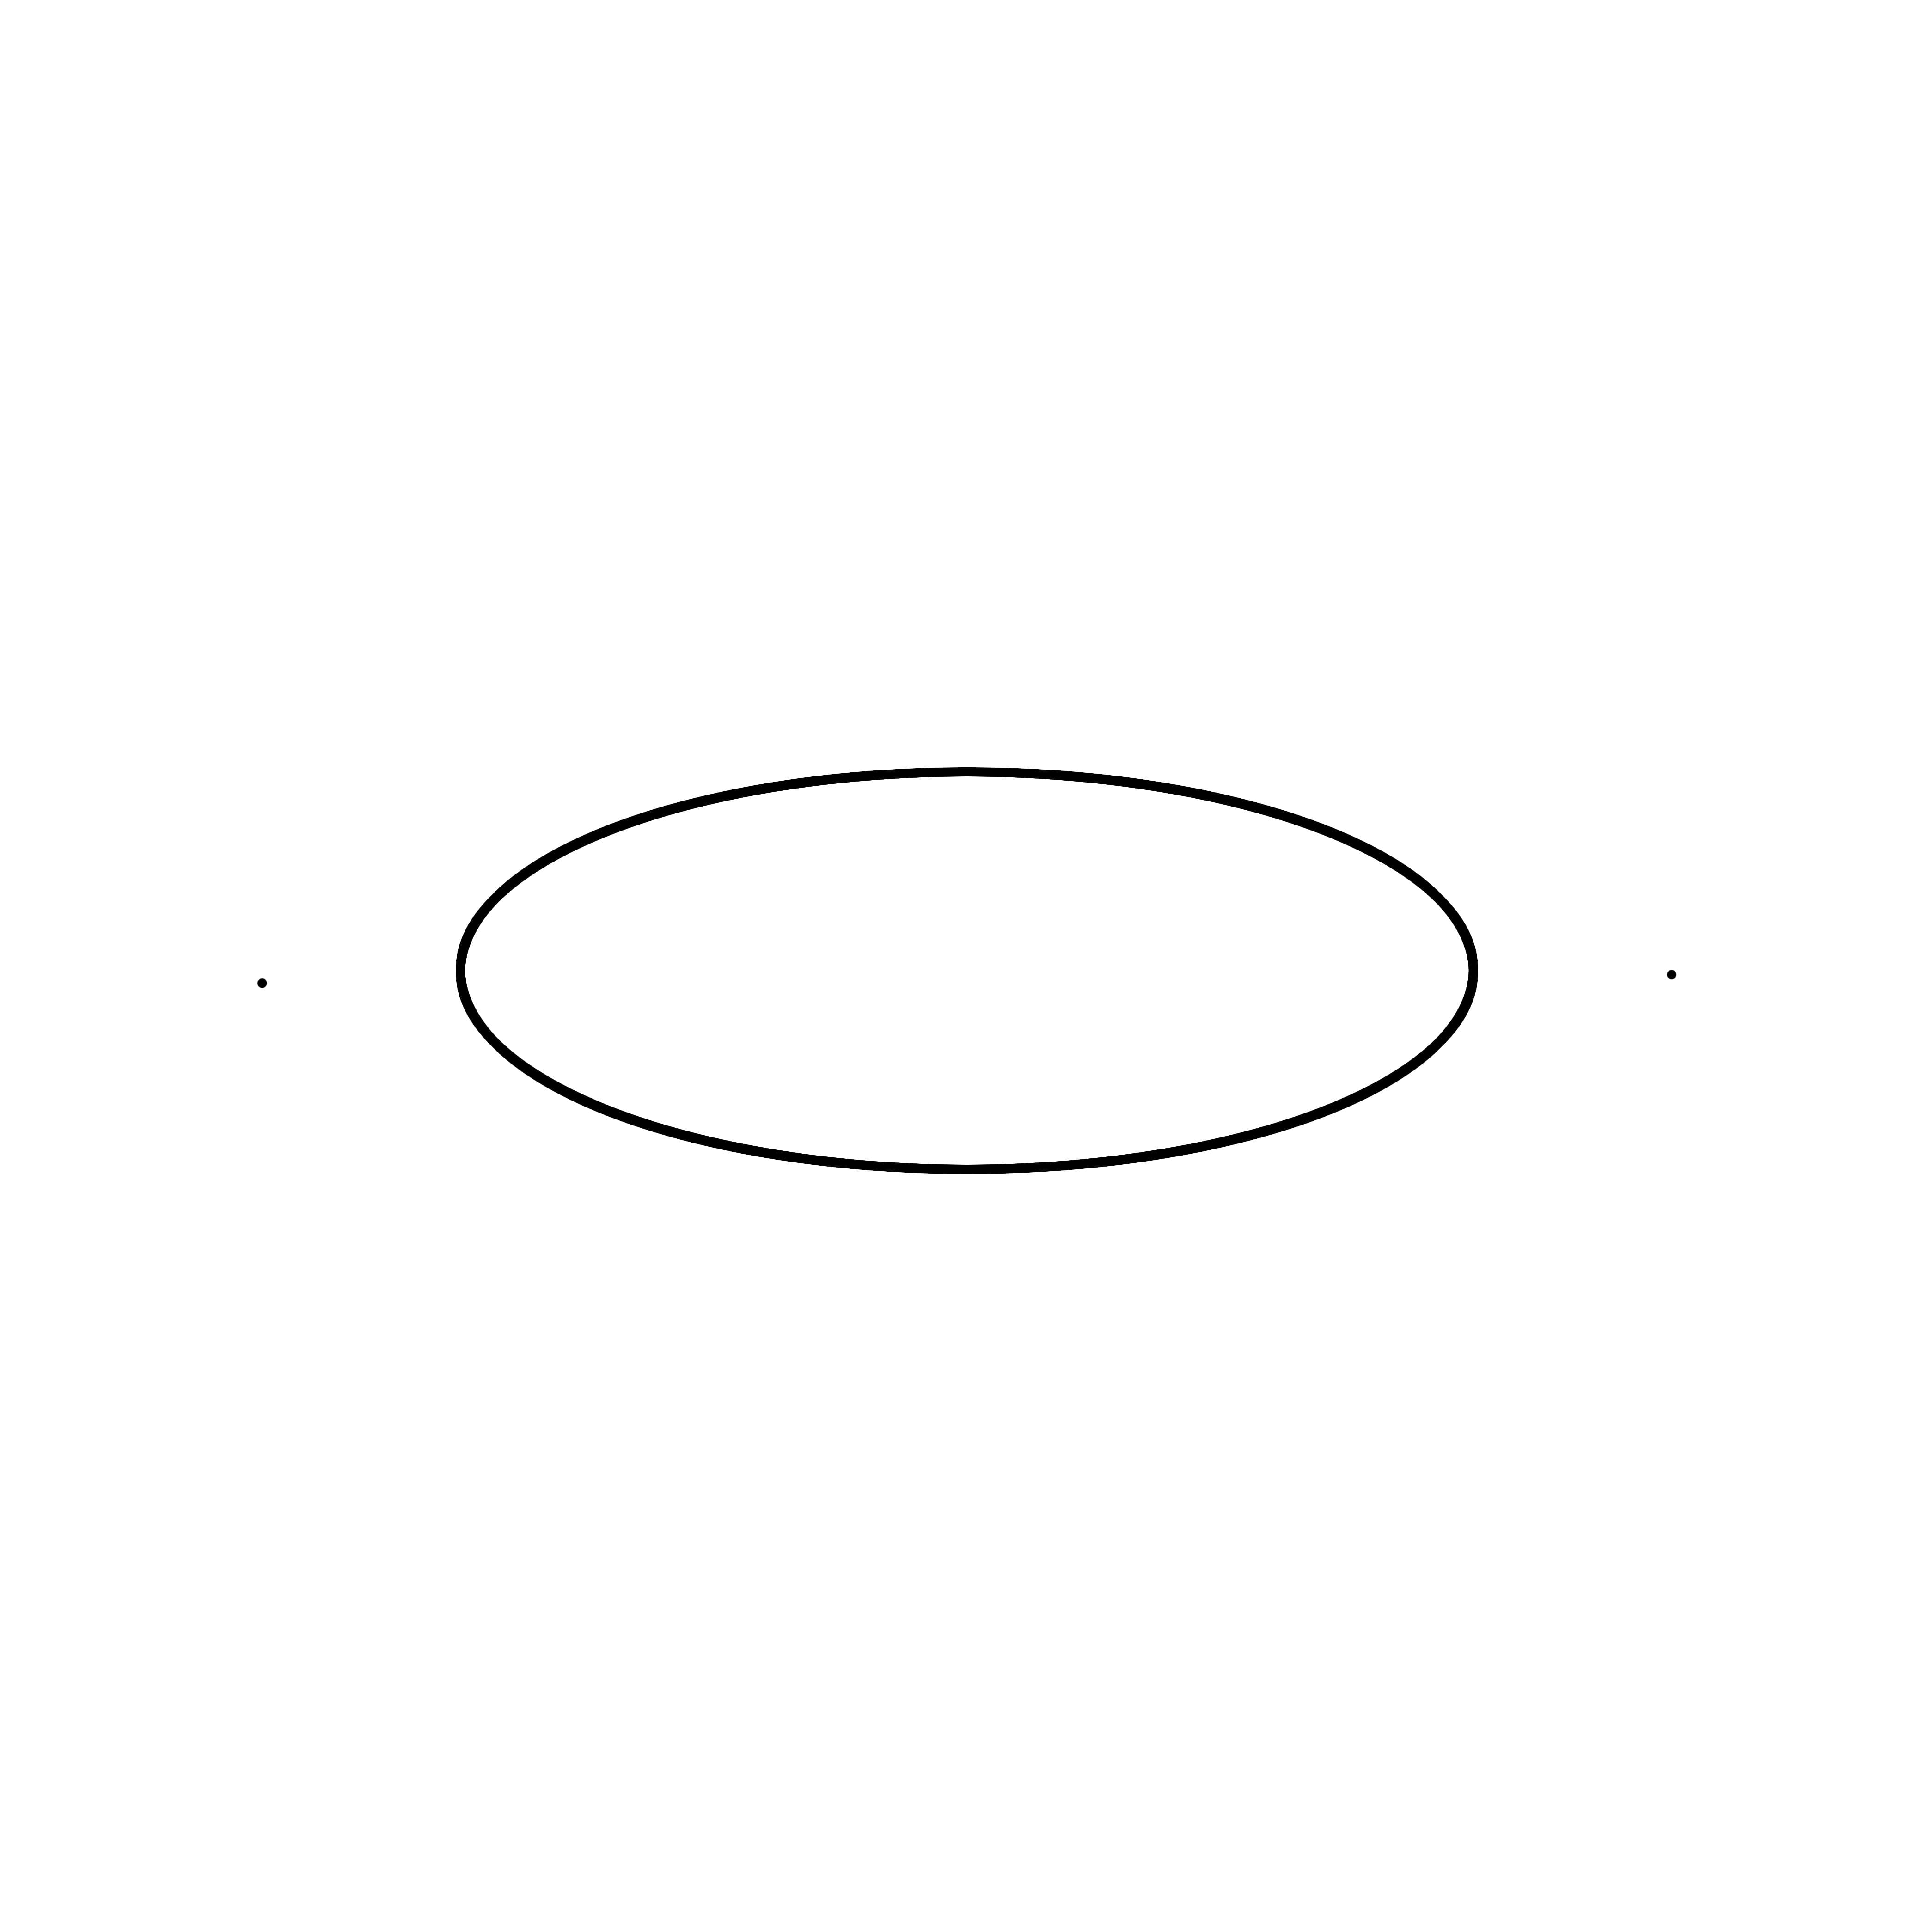 draw optical illusion Impossible Oval